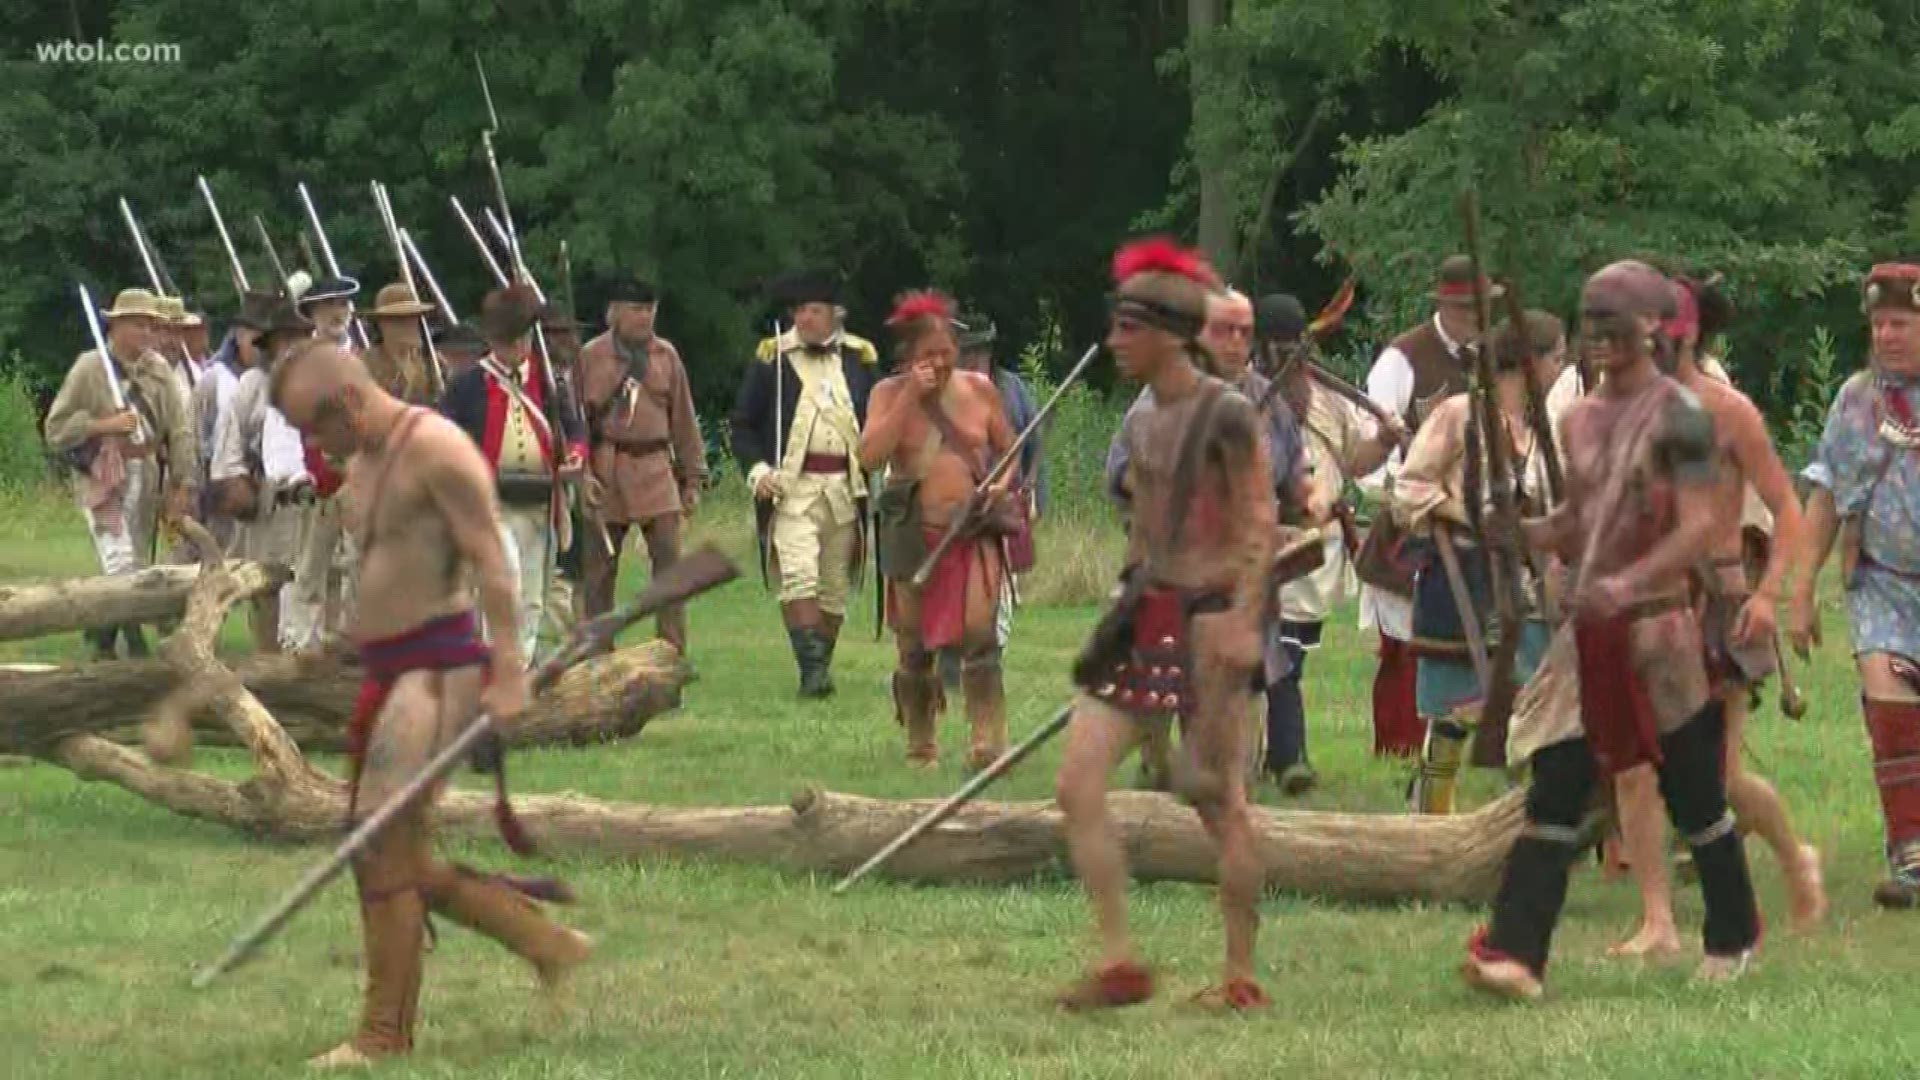 Battle lines were drawn, rifles were fired and a toast celebrated victory Sunday in Maumee.